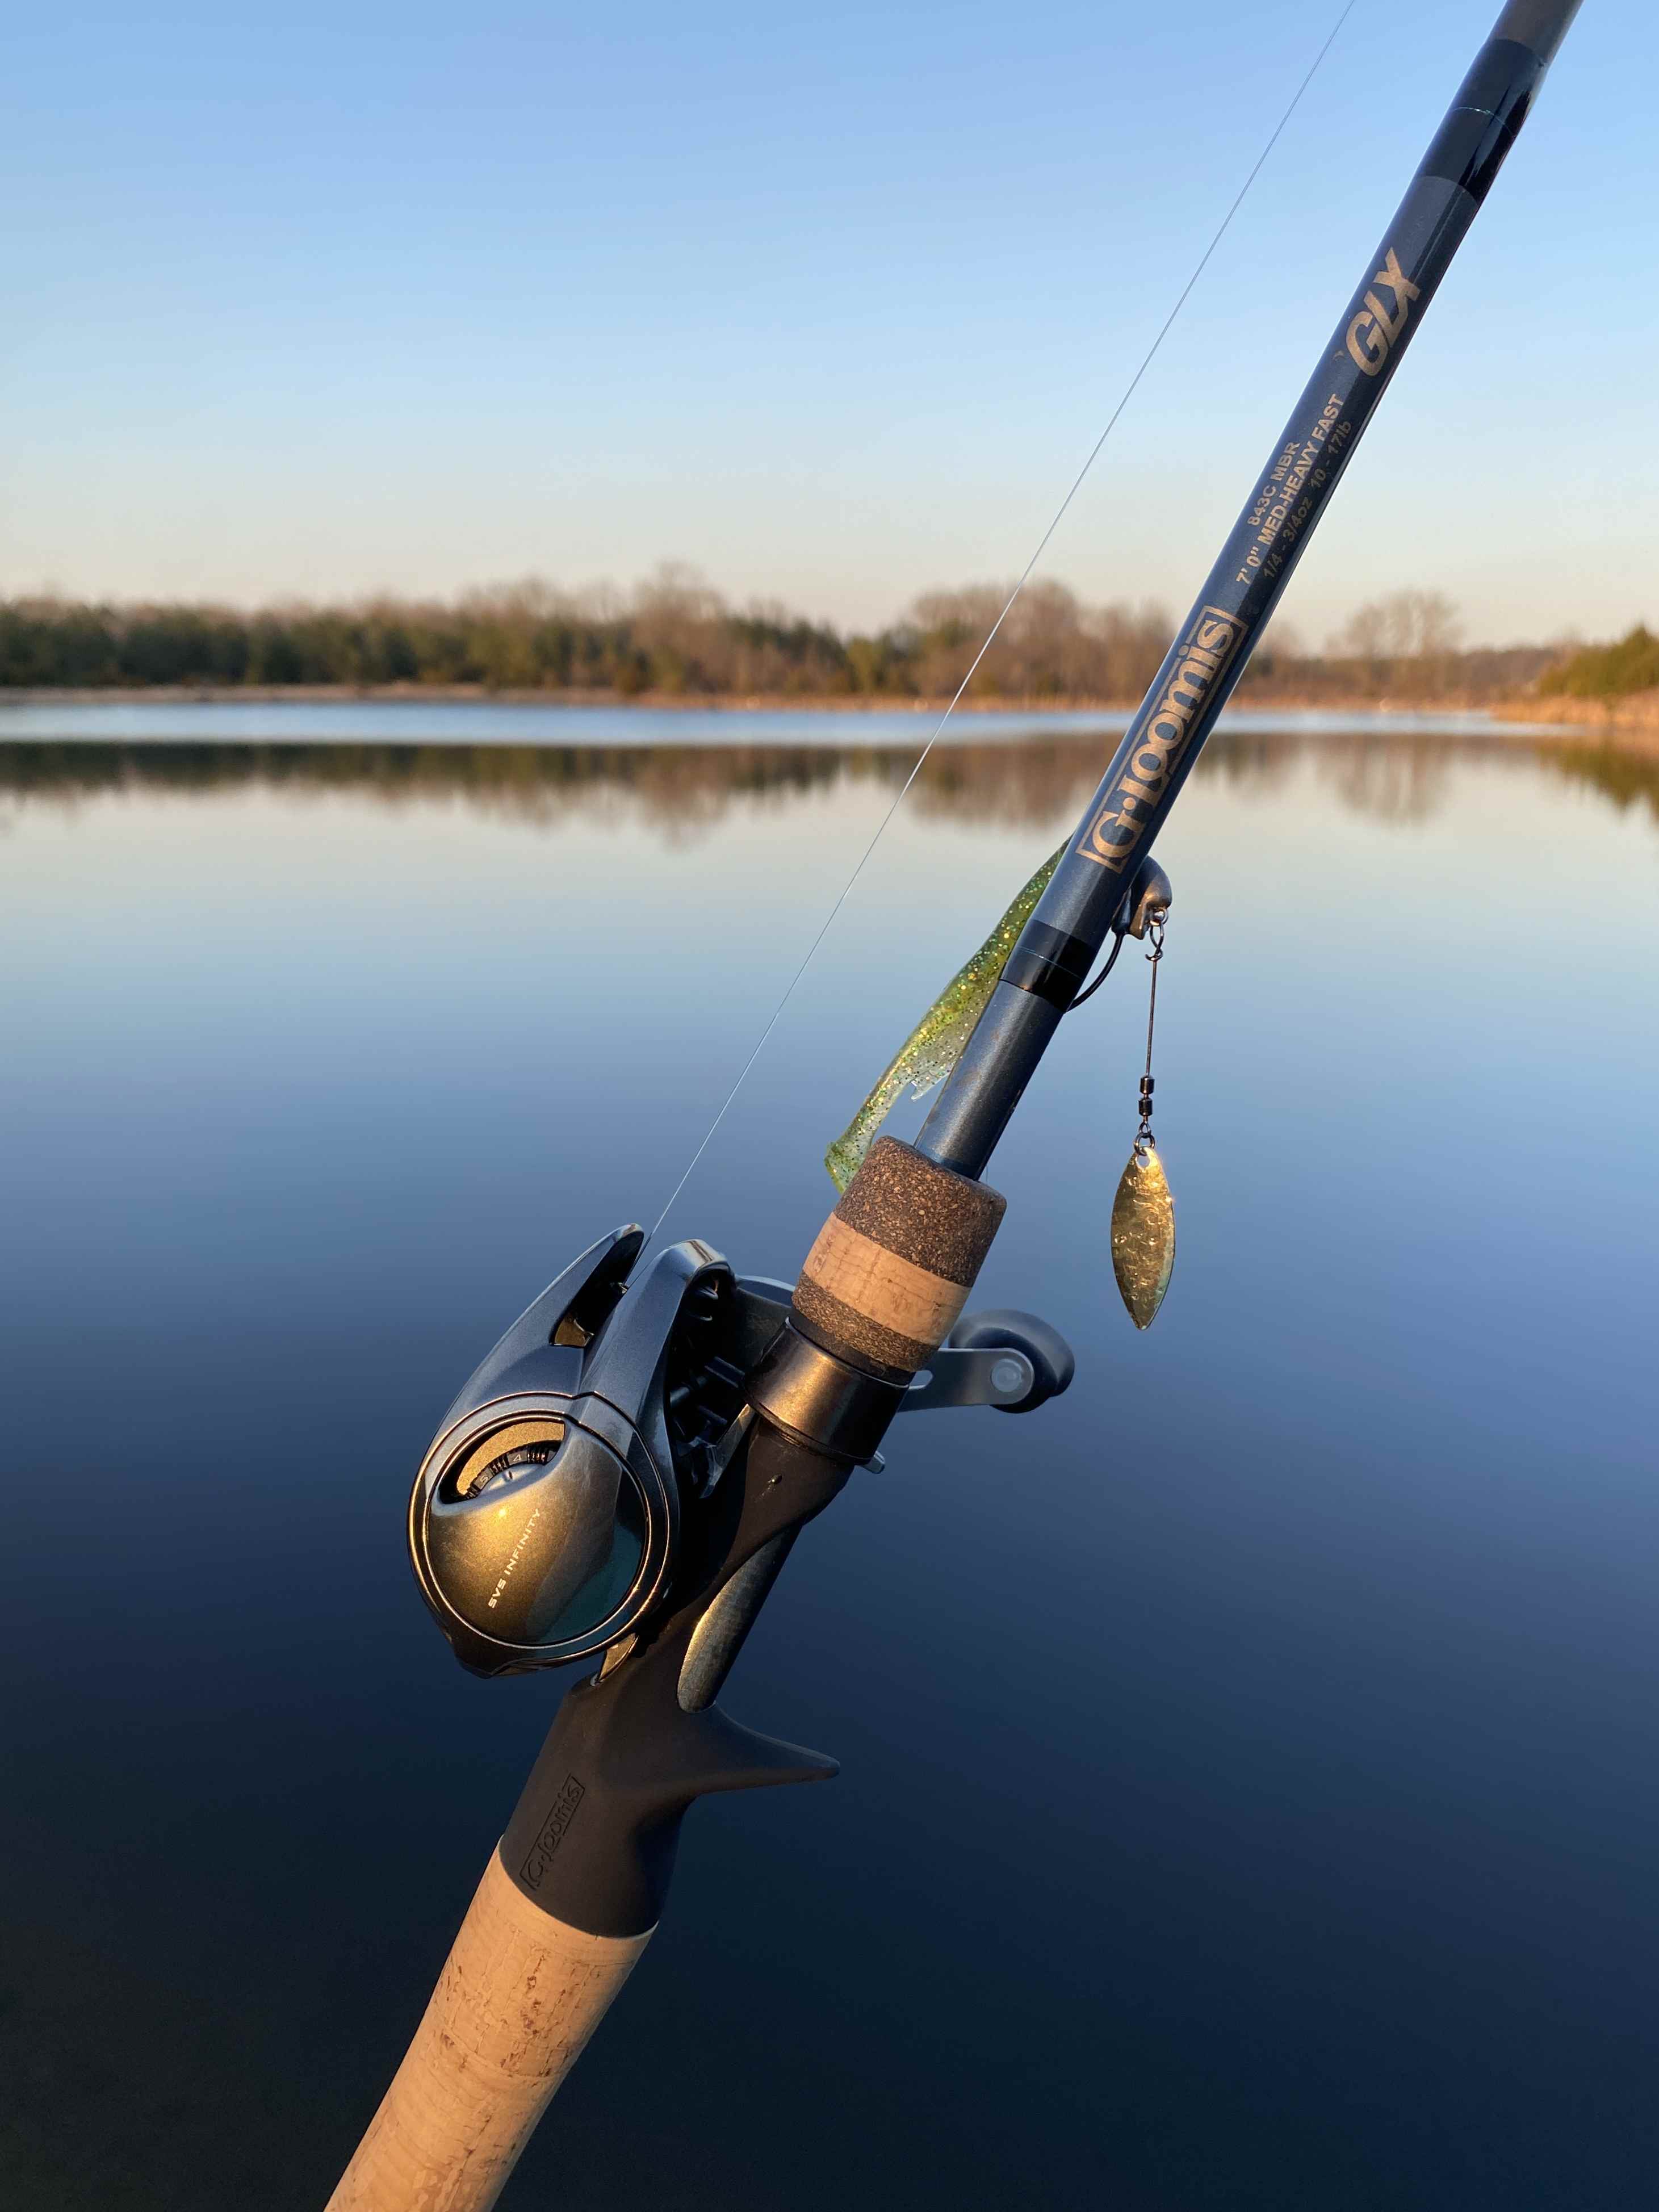 G Loomis GLX 843c MBR in-depth review - Fishing Rods, Reels, Line, and  Knots - Bass Fishing Forums